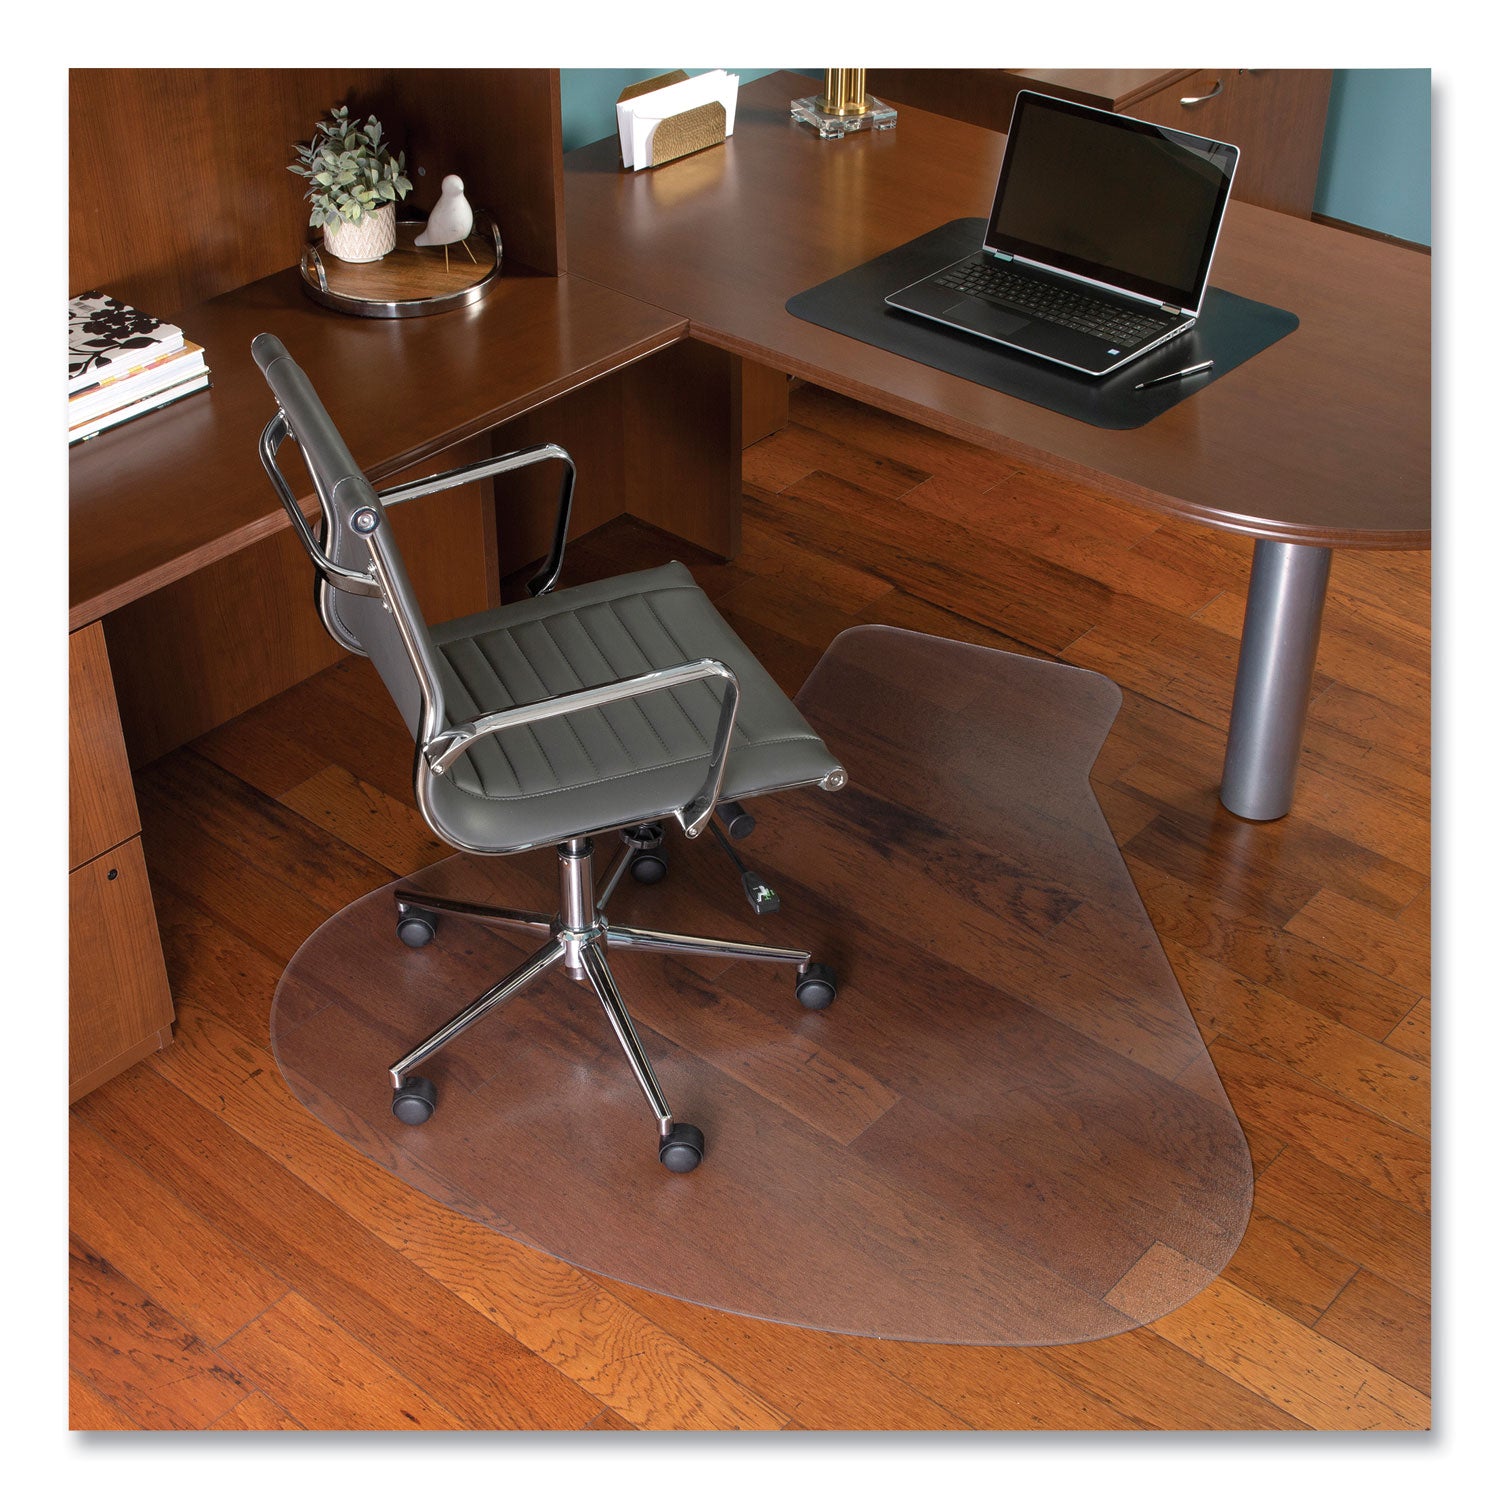 everlife-workstation-chair-mat-for-hard-floors-with-lip-66-x-60-clear_esr132775 - 2